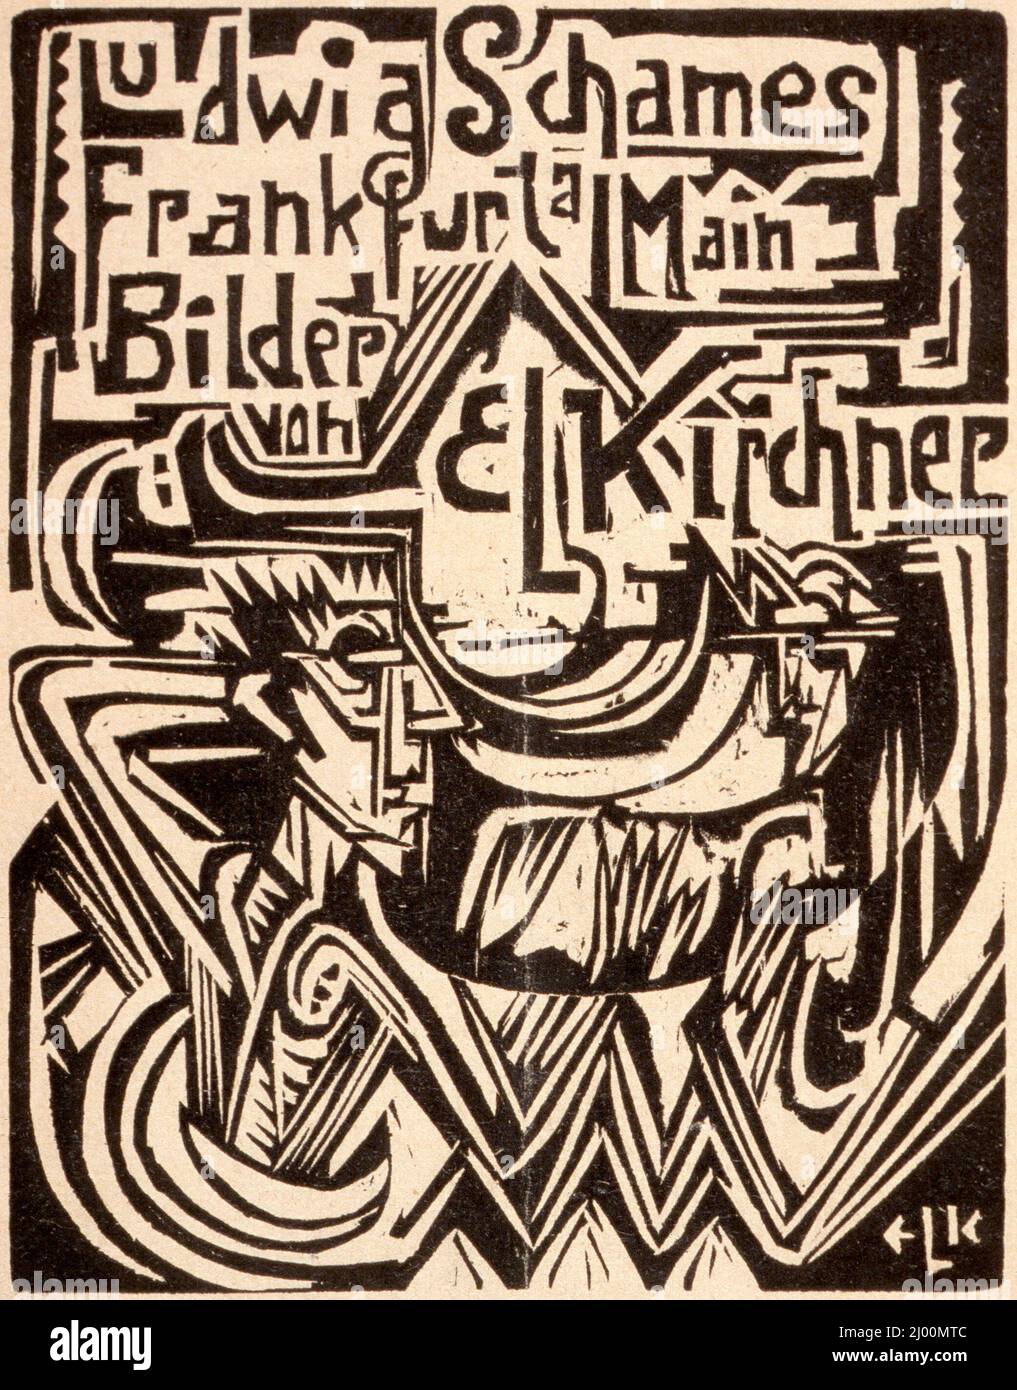 Ludwig Schames, Frankfurt am Main: Pictures by E. L. Kirchner. Ernst Ludwig Kirchner (Germany, 1880-1938). Germany, Frankfurt, 1919. Prints; woodcuts. Woodcut on yellow cover stock Stock Photo